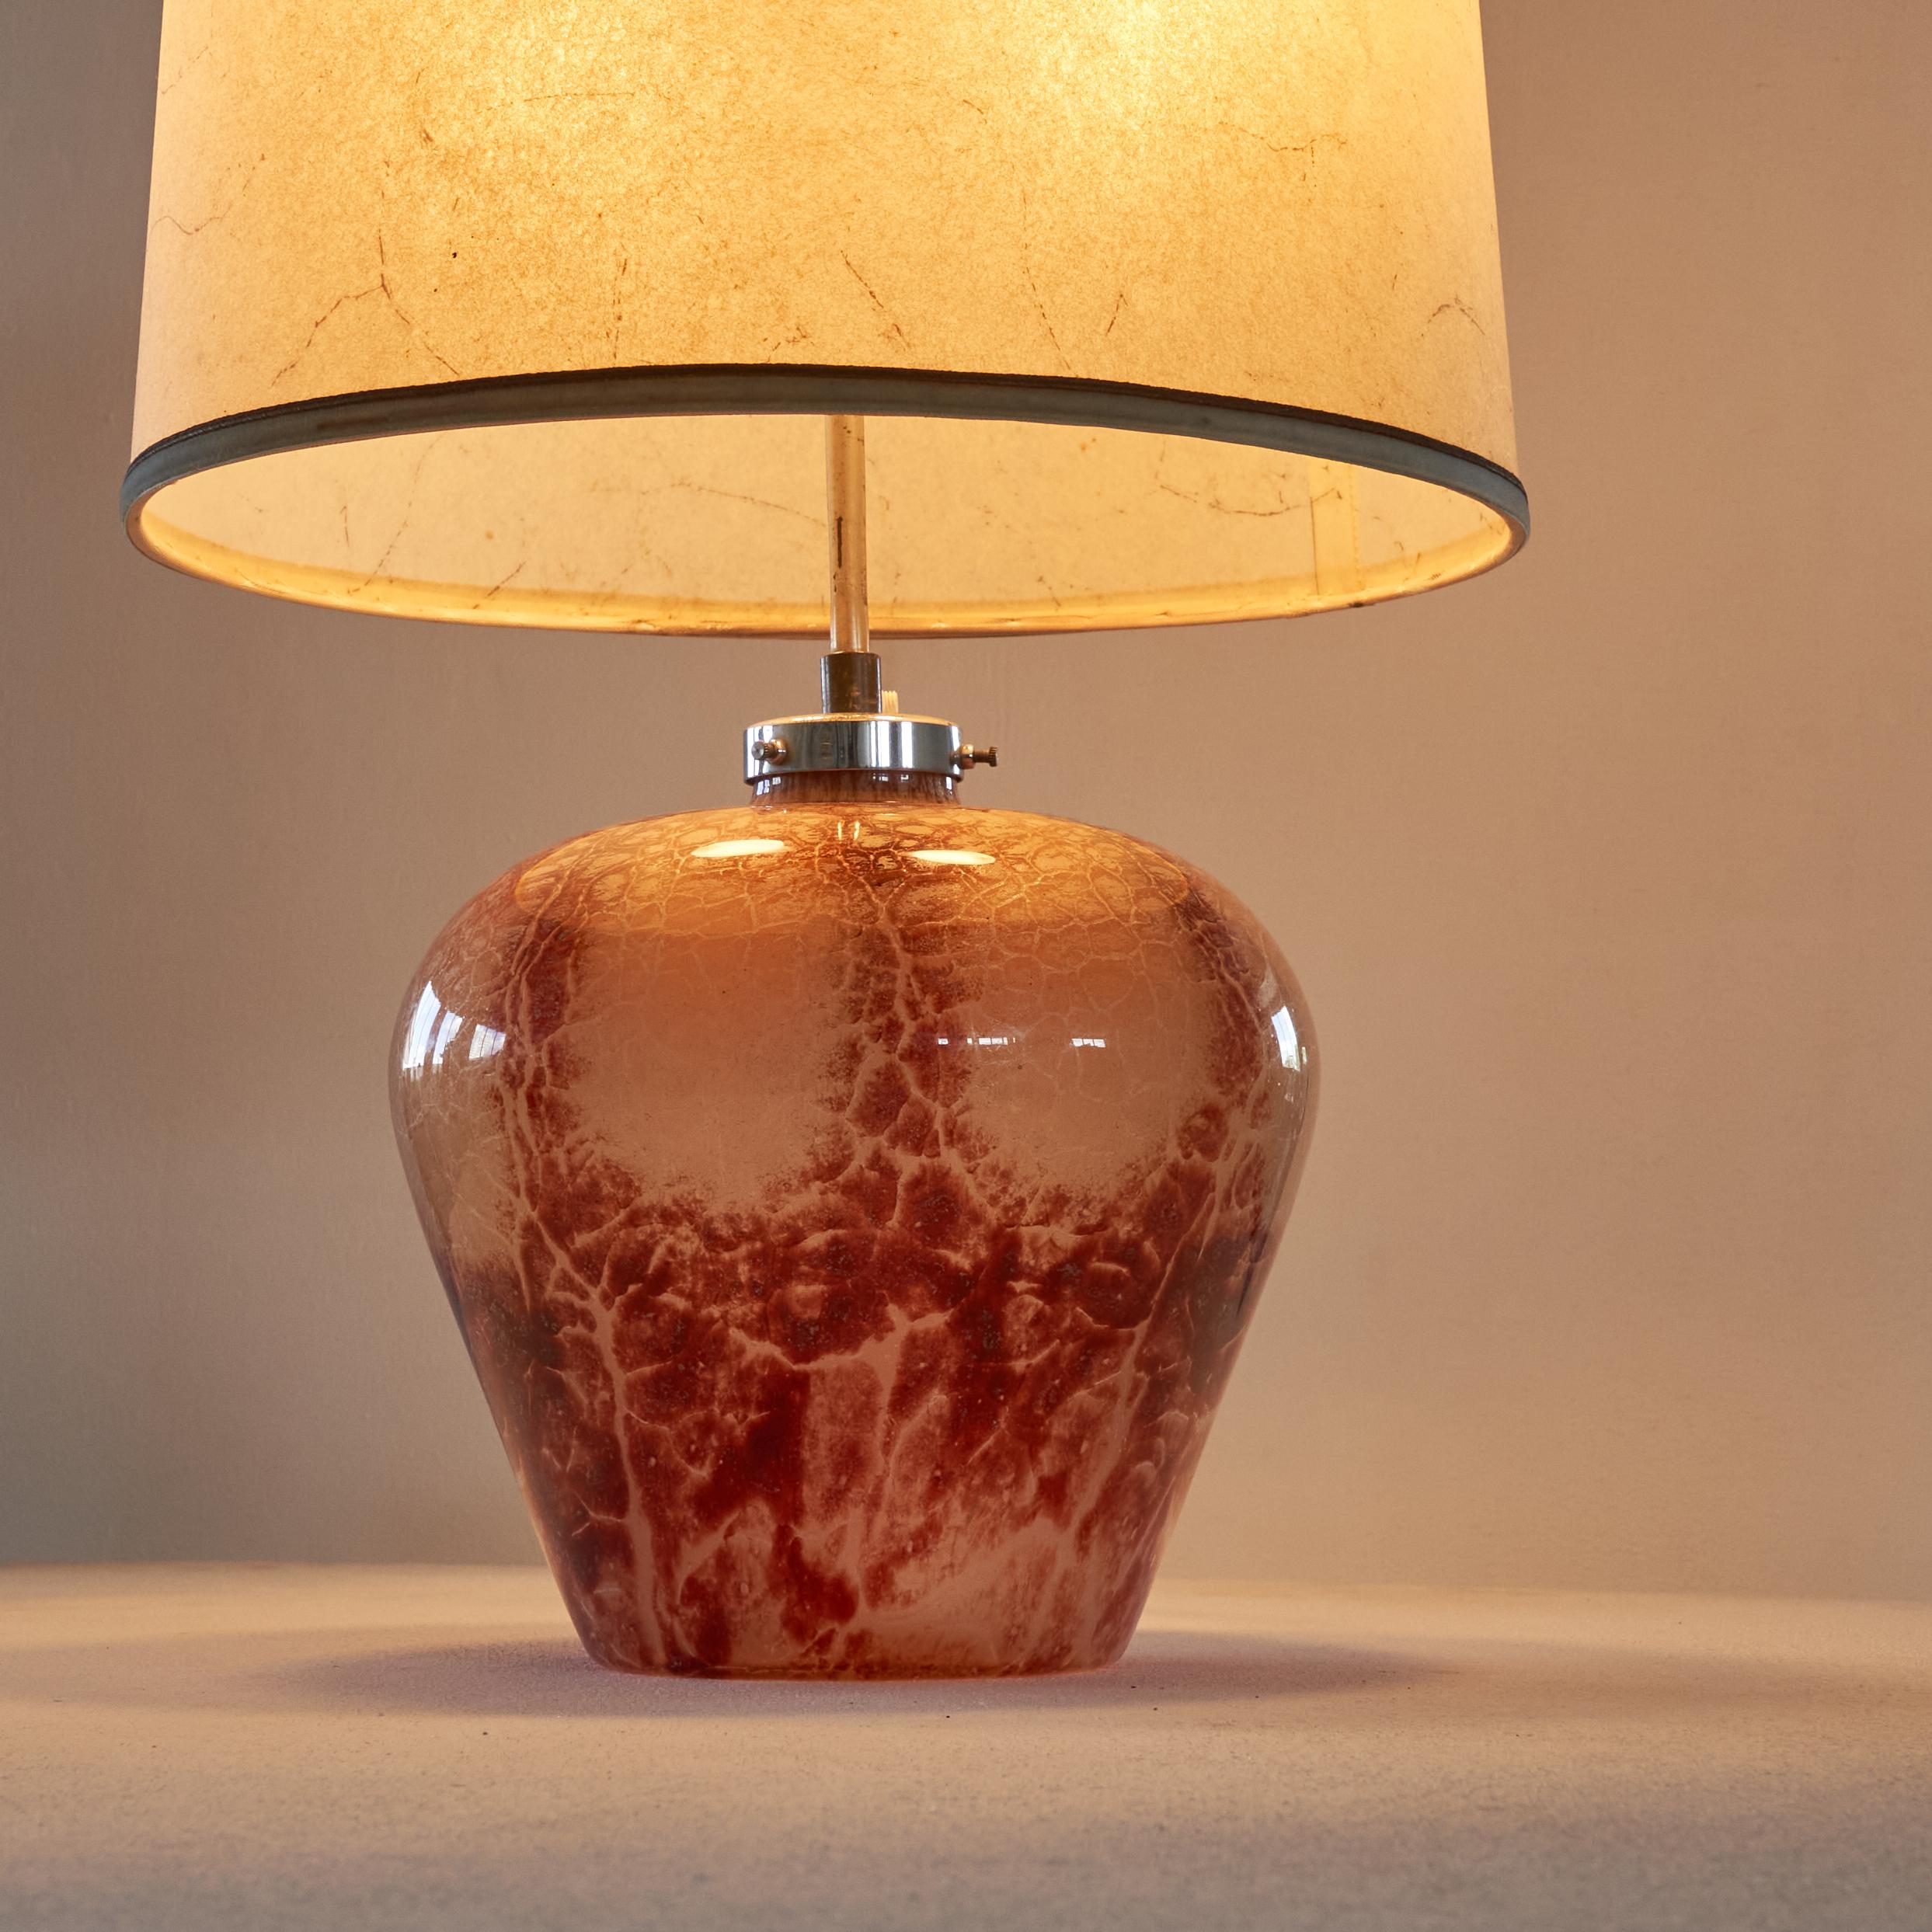 Karl Wiedmann Art Deco WMF Table Lamp in Art Glass with Original Shade 1930s For Sale 1